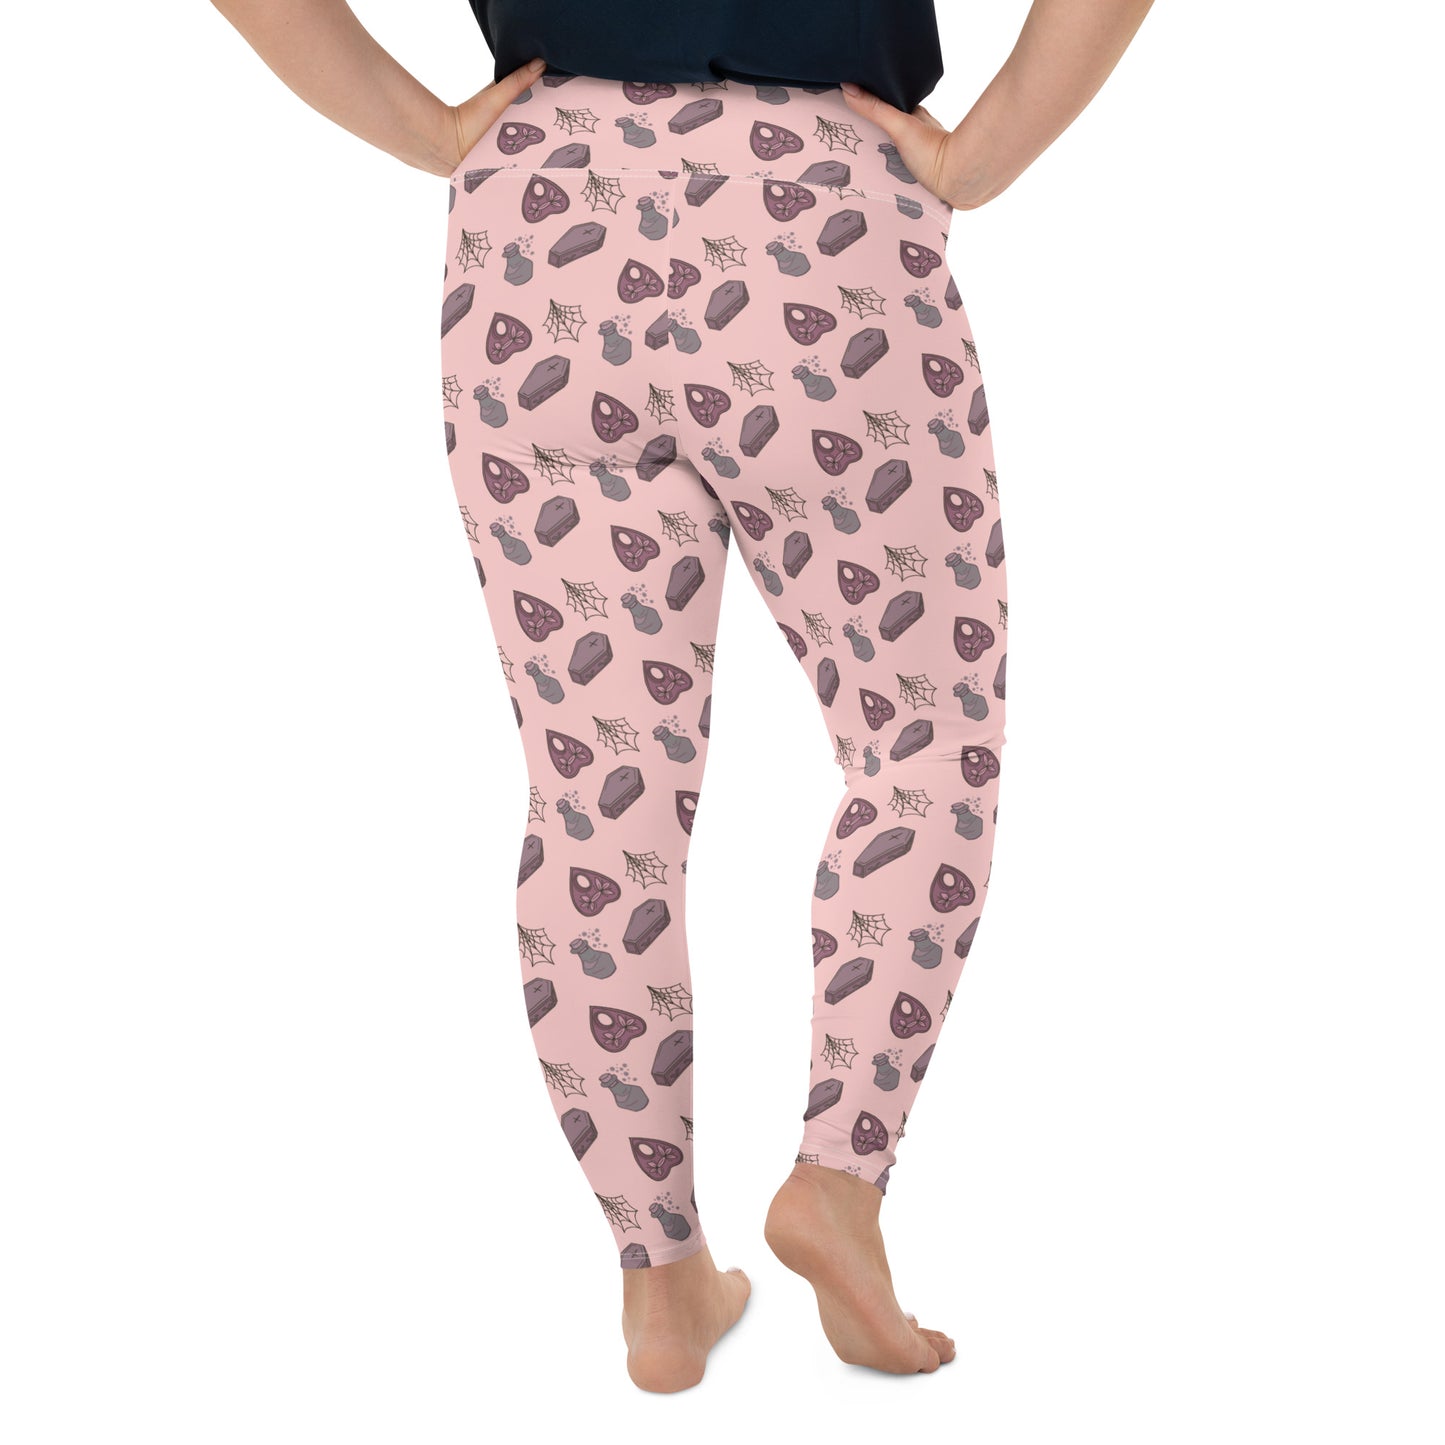 Haunted Communication - All-Over Print Plus Size Leggings